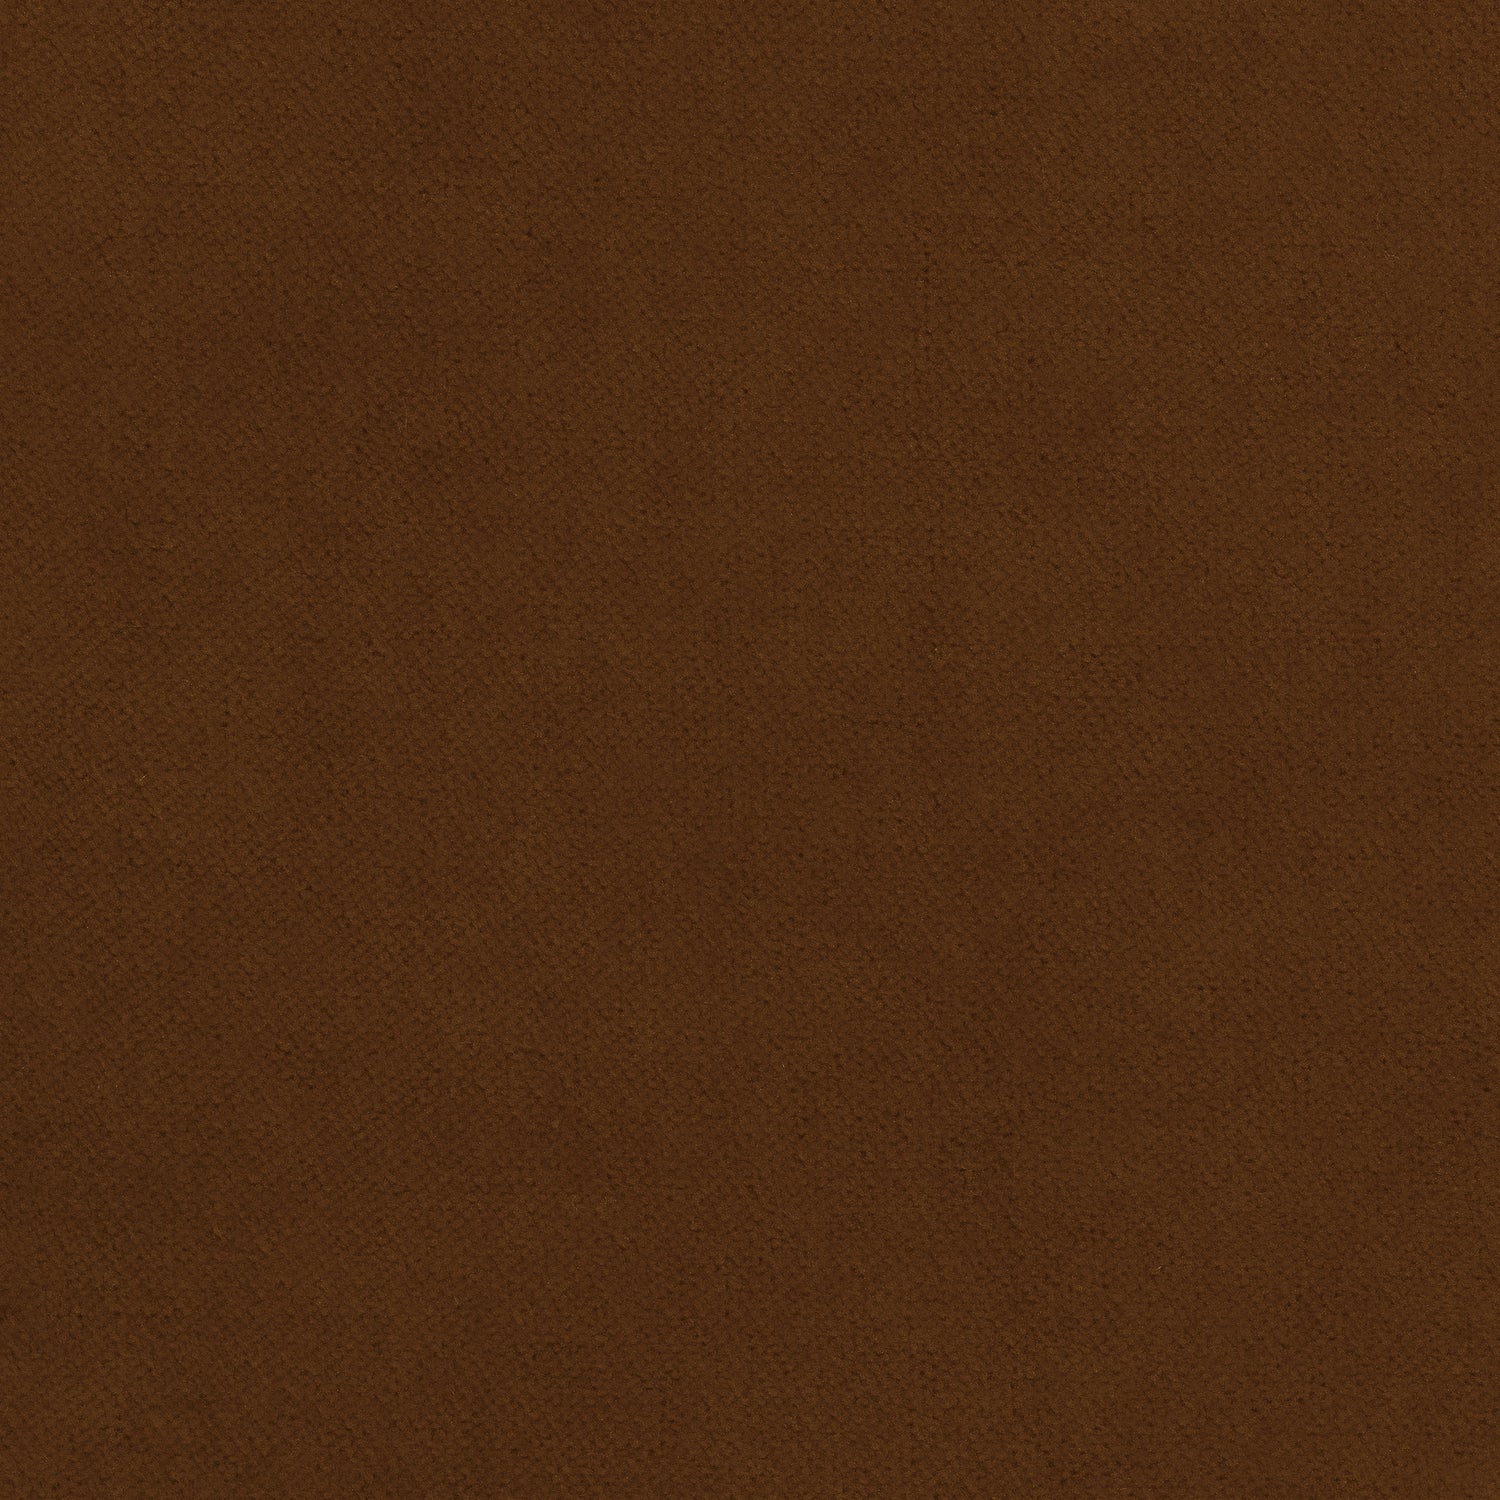 Club Velvet fabric in chestnut color - pattern number W7229 - by Thibaut in the Club Velvet collection